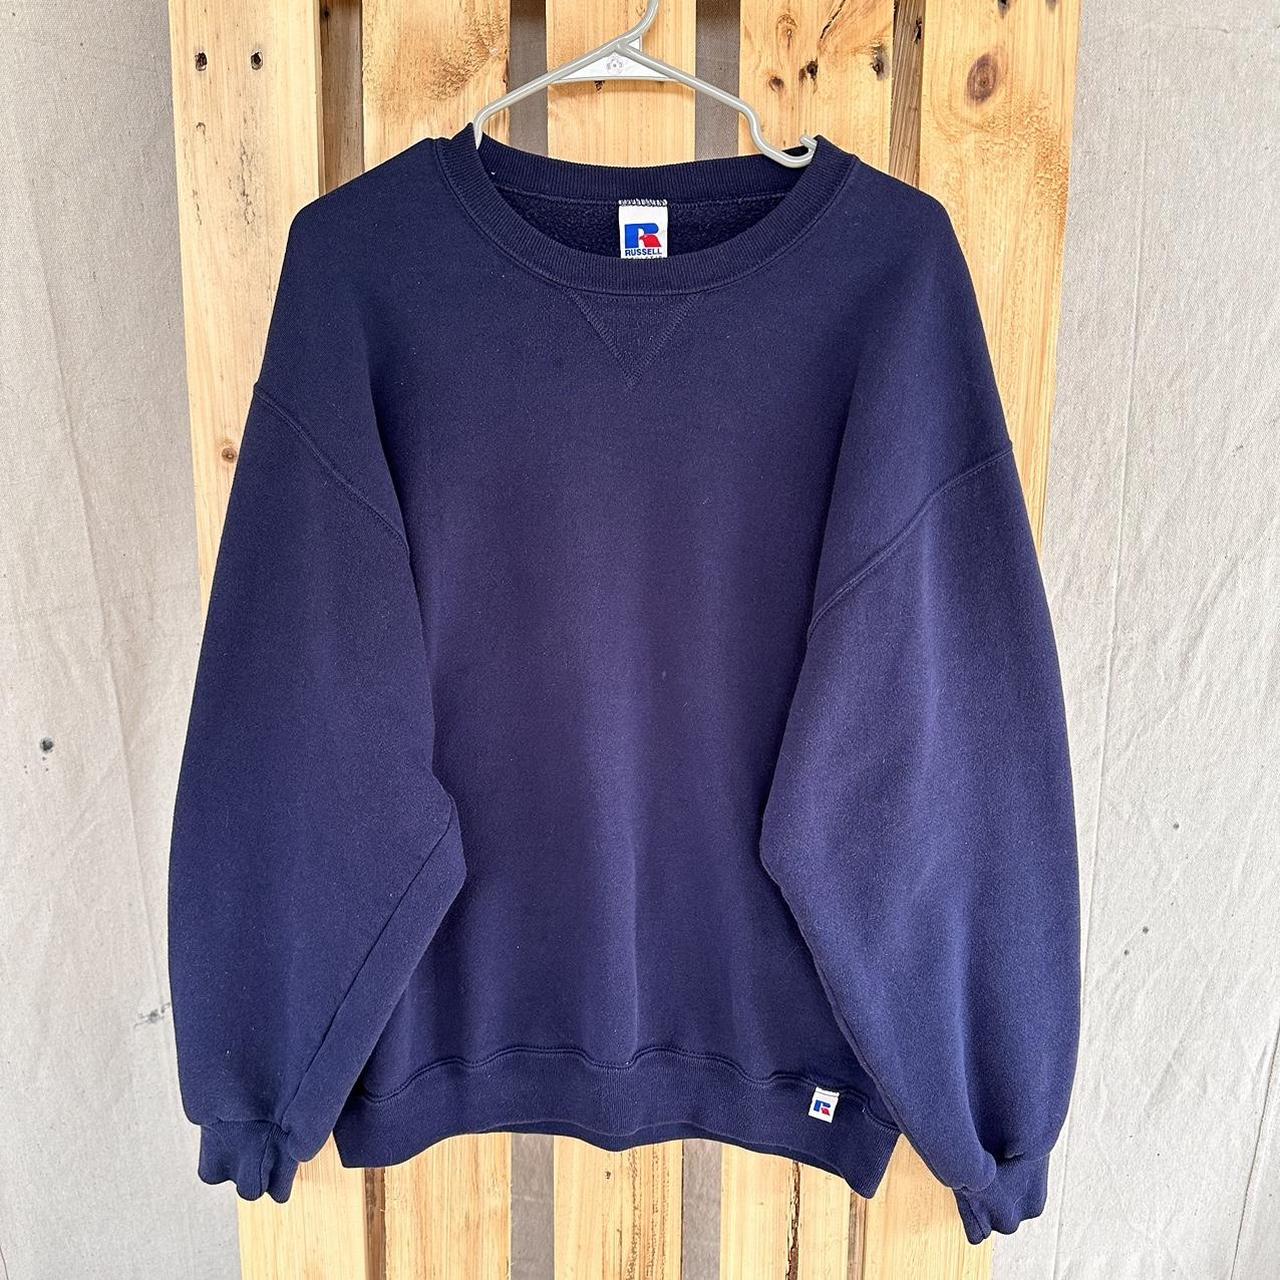 Blue Russel crewneck *tiny pin stain on front - Depop